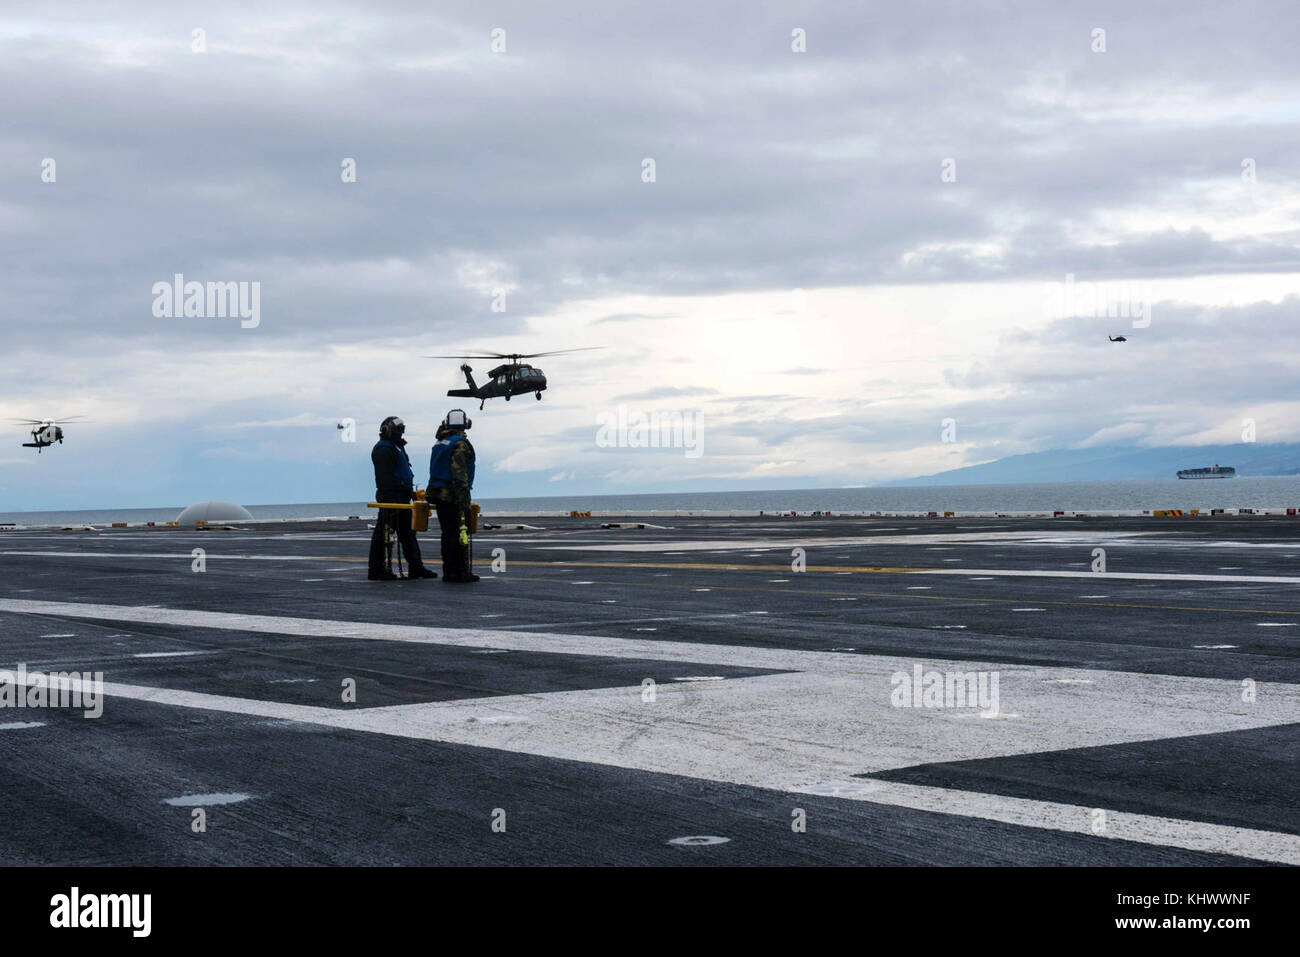 171116-N-UH661-018  STRAIT OF JUAN DE FUCA (Nov. 16, 2017) Sailors prepare to chock and chain foa UH-60L Blackhawk helicopter assigned to the Washington Army National Guard, 1st General Support Aviation Battalion, on the flight deck aboard USS John C. Stennis (CVN 74). John C. Stennis is returning to homeport after the successful completion of a two-week underway where the ship’s crew conducted training to prepare for its next scheduled deployment. (U.S. Navy photo by Mass Communication Specialist 3rd Class Mike Pernick/Released) Stock Photo